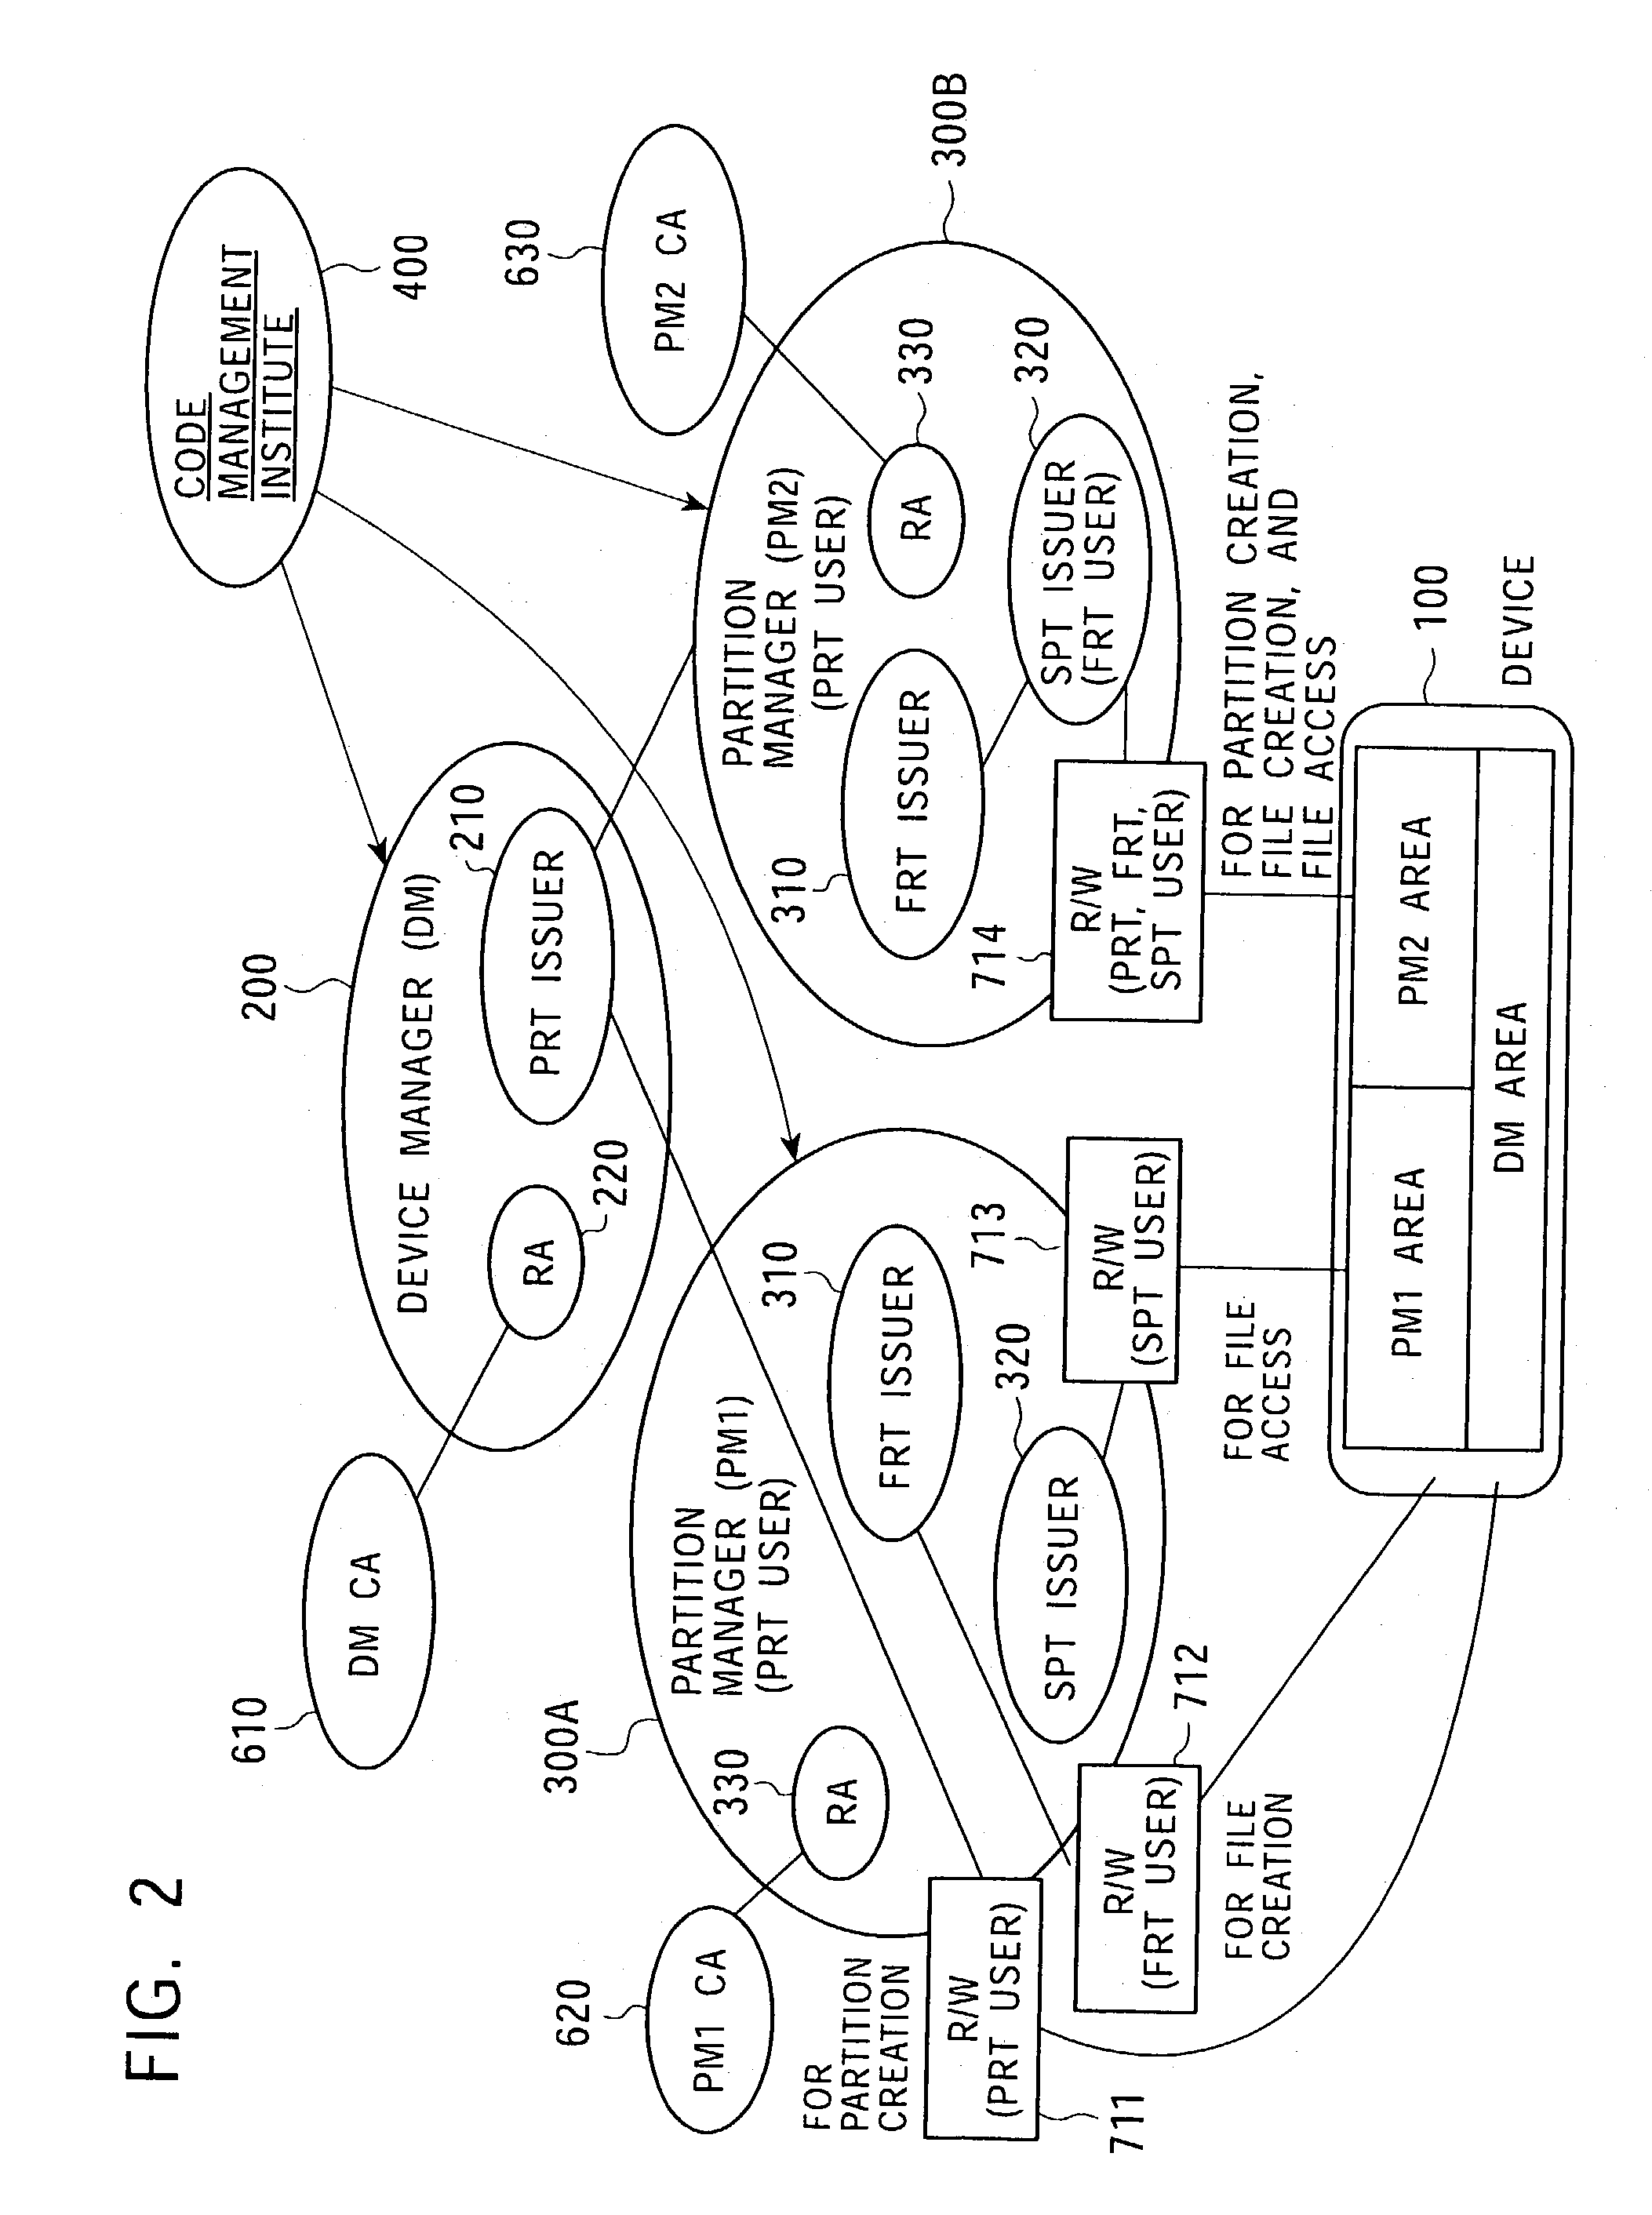 Memory access control system and management method using access control ticket